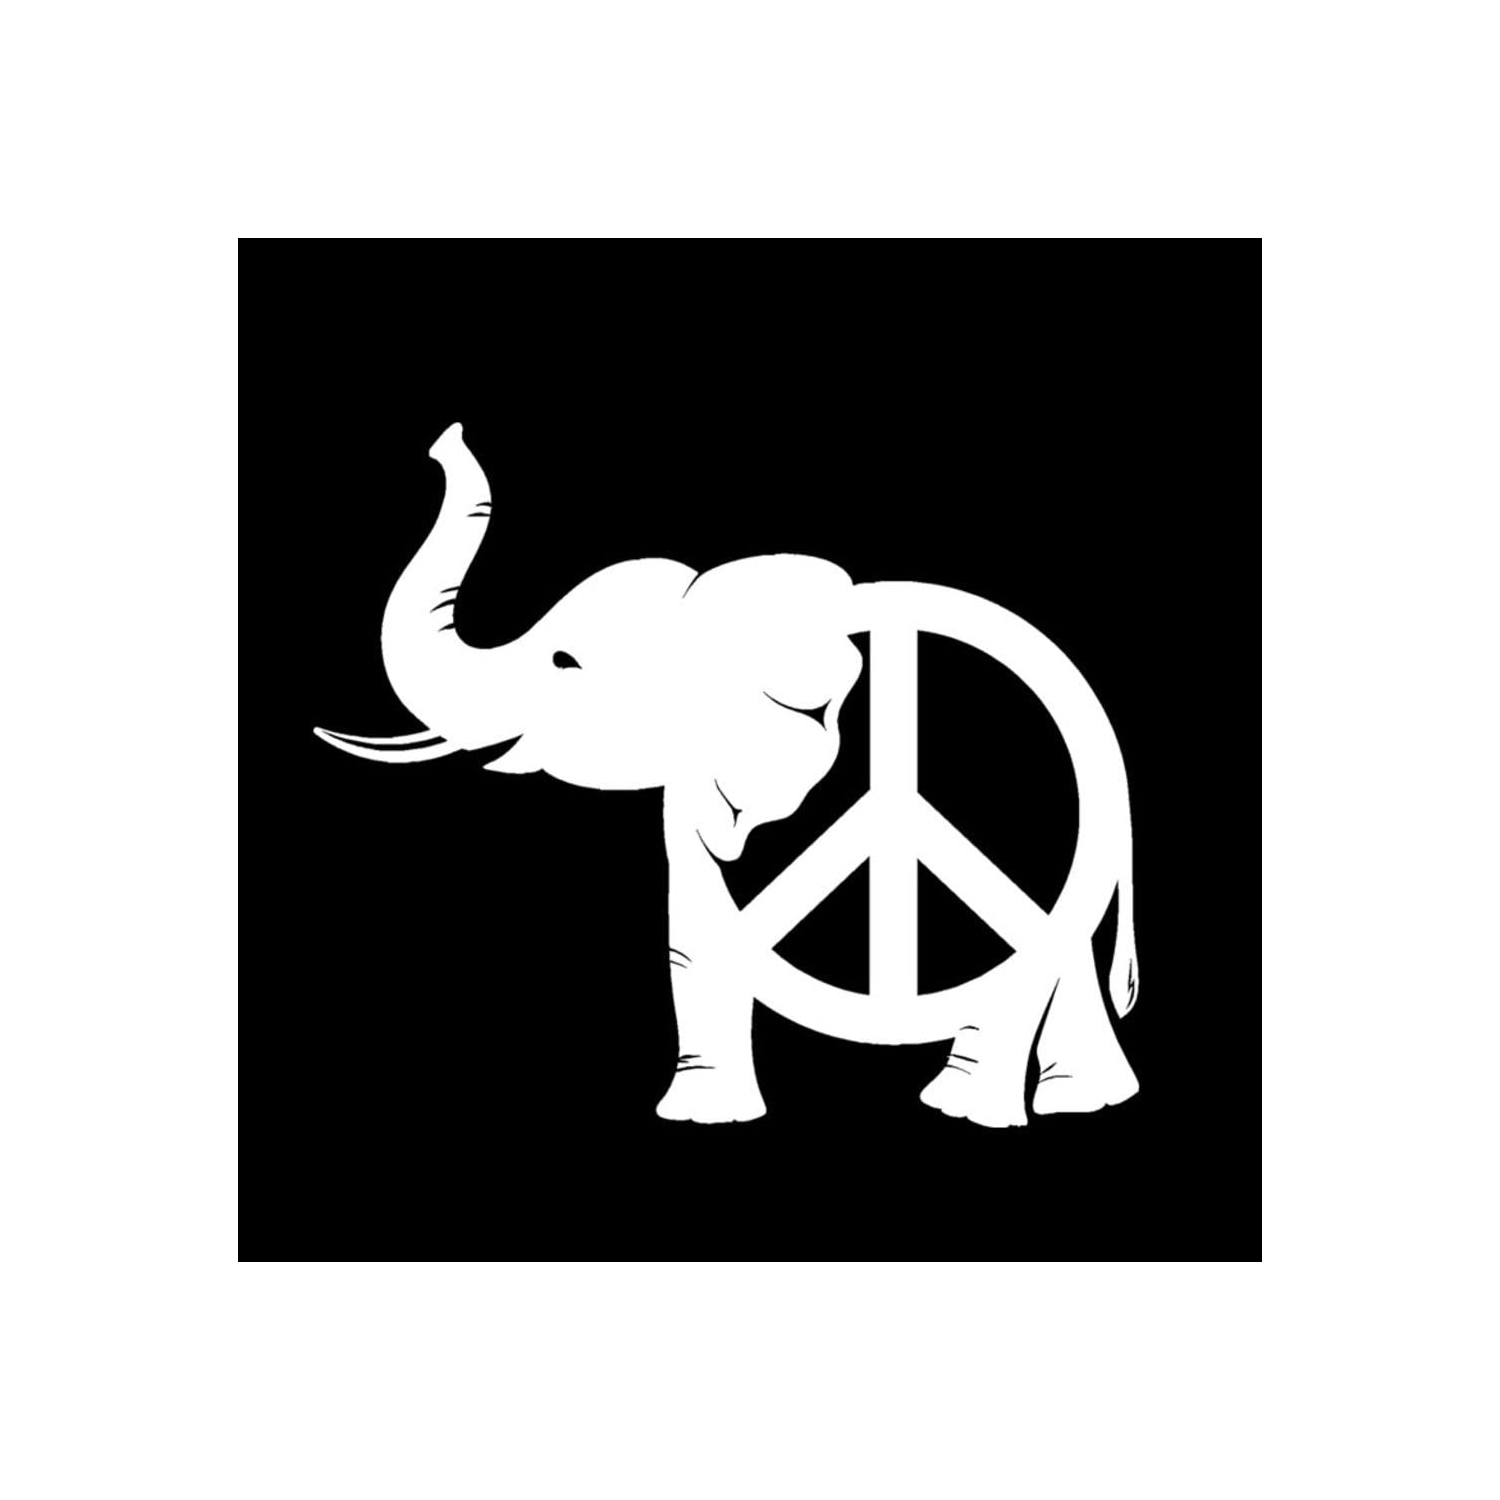 Elephant Peace Vinyl Decal Sticker | Cars Trucks Vans Walls Laptops Cups | White | 5.5 inches | KCD1523